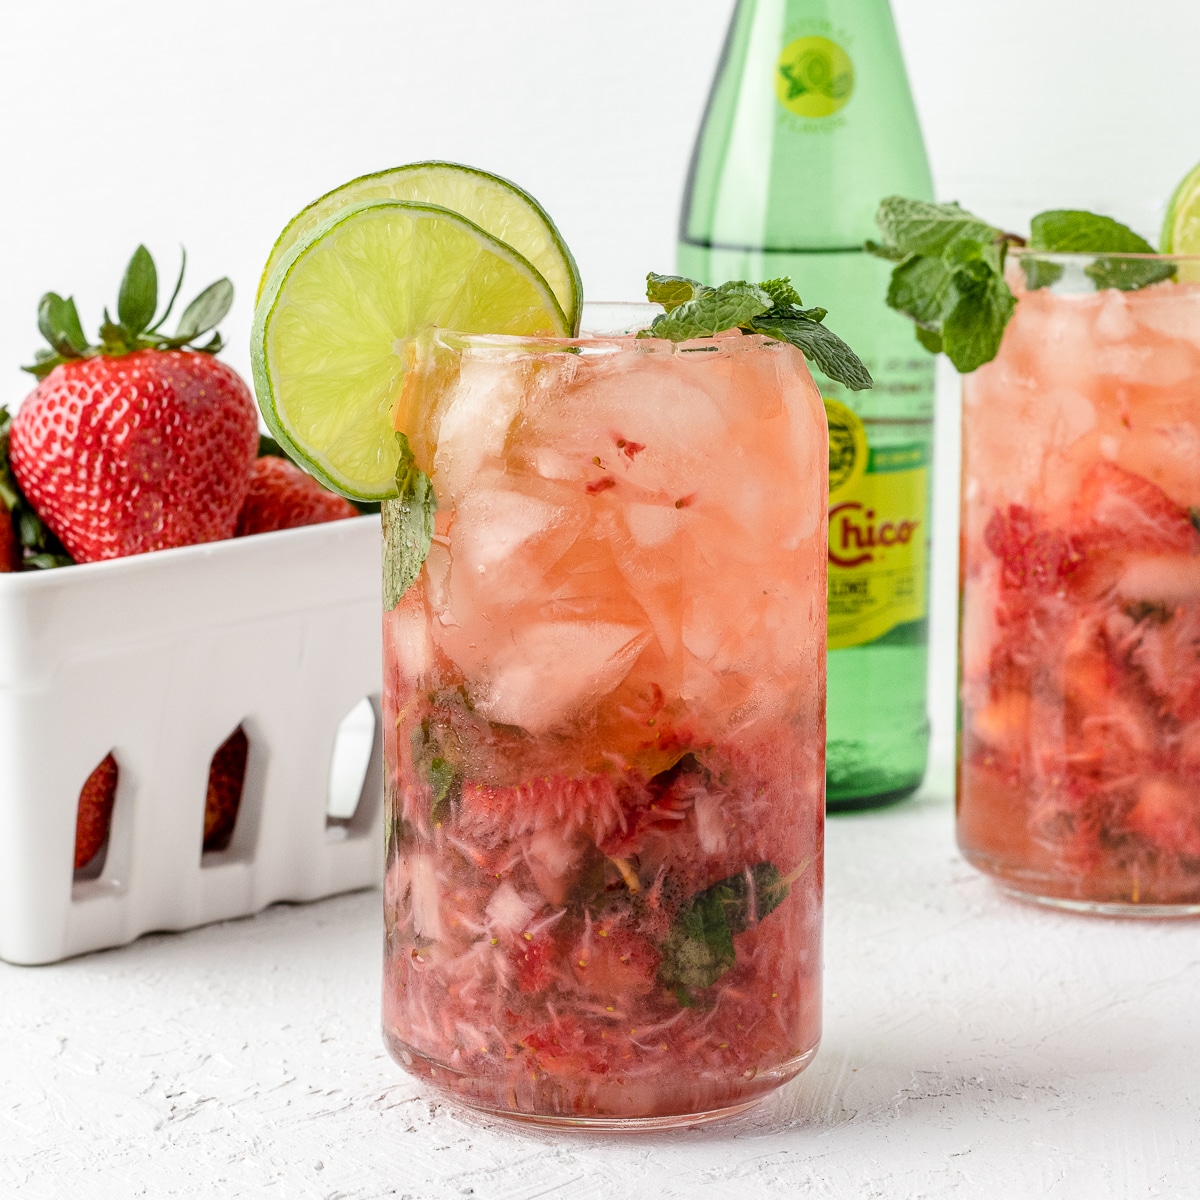 2 non alcoholic strawberry mojito mocktails garnished with lime slices and fresh mint leaves. Fresh strawberries and mineral water in the background.